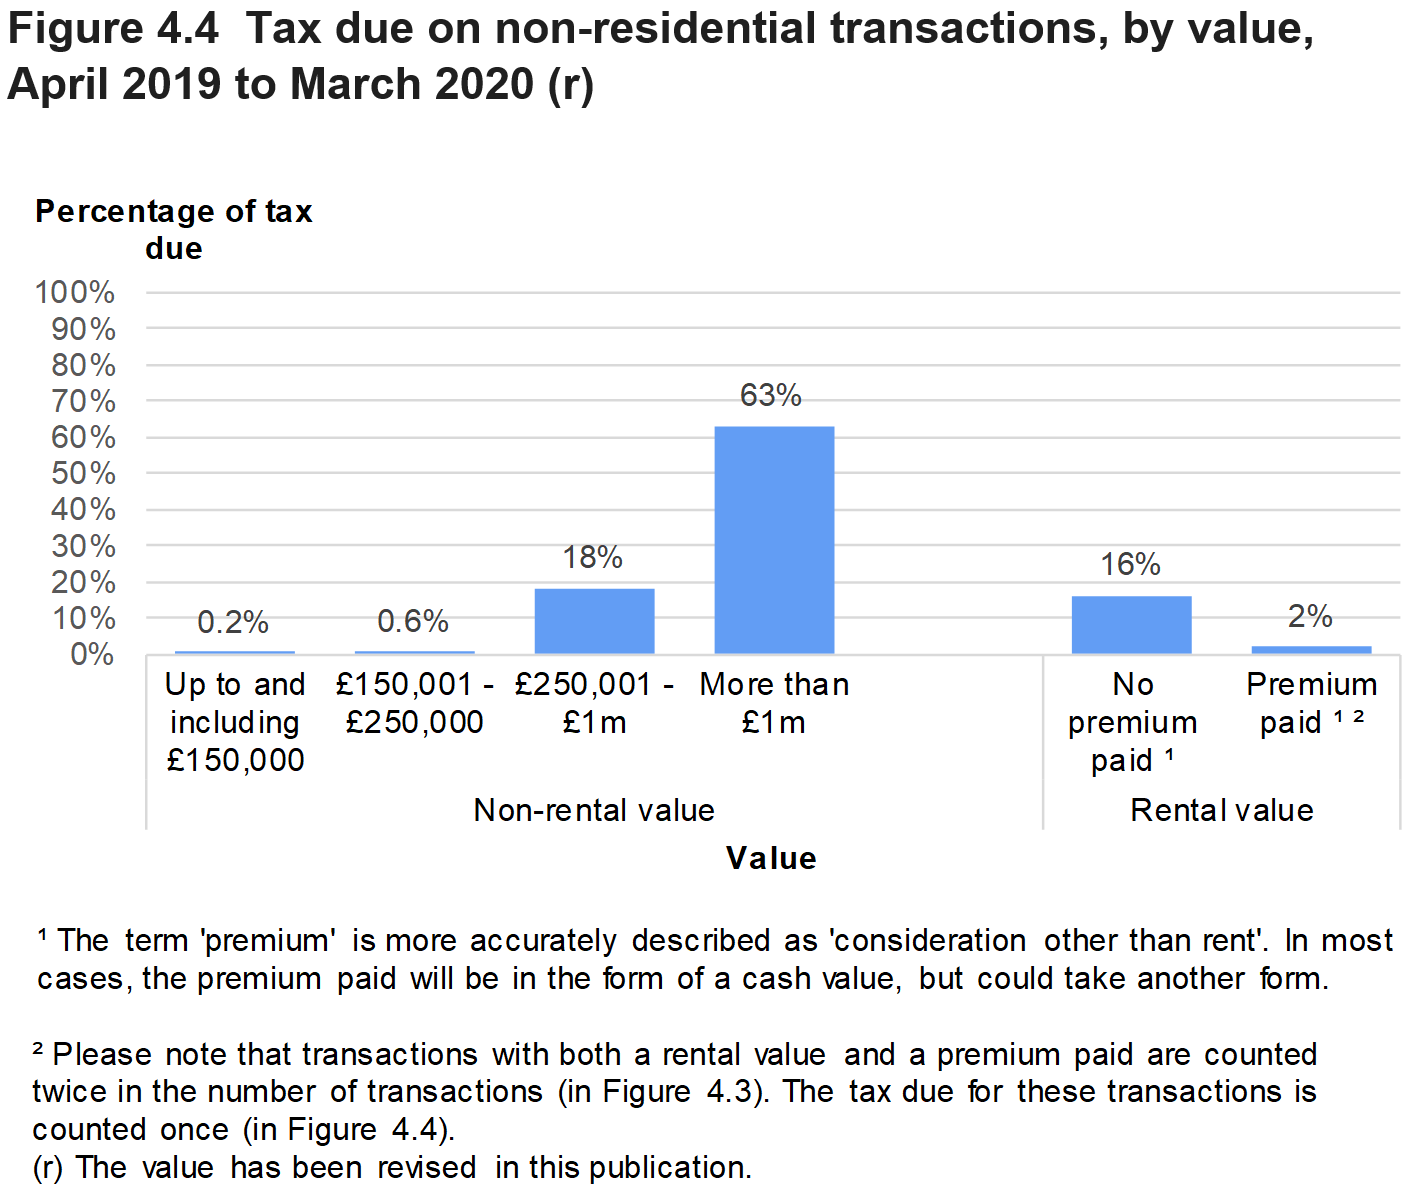 Figure 4.4 shows the amount of tax due on non-residential transactions, by value of the property. Data is presented as the percentage of transactions and relates to transactions effective in April 2019 to March 2020.